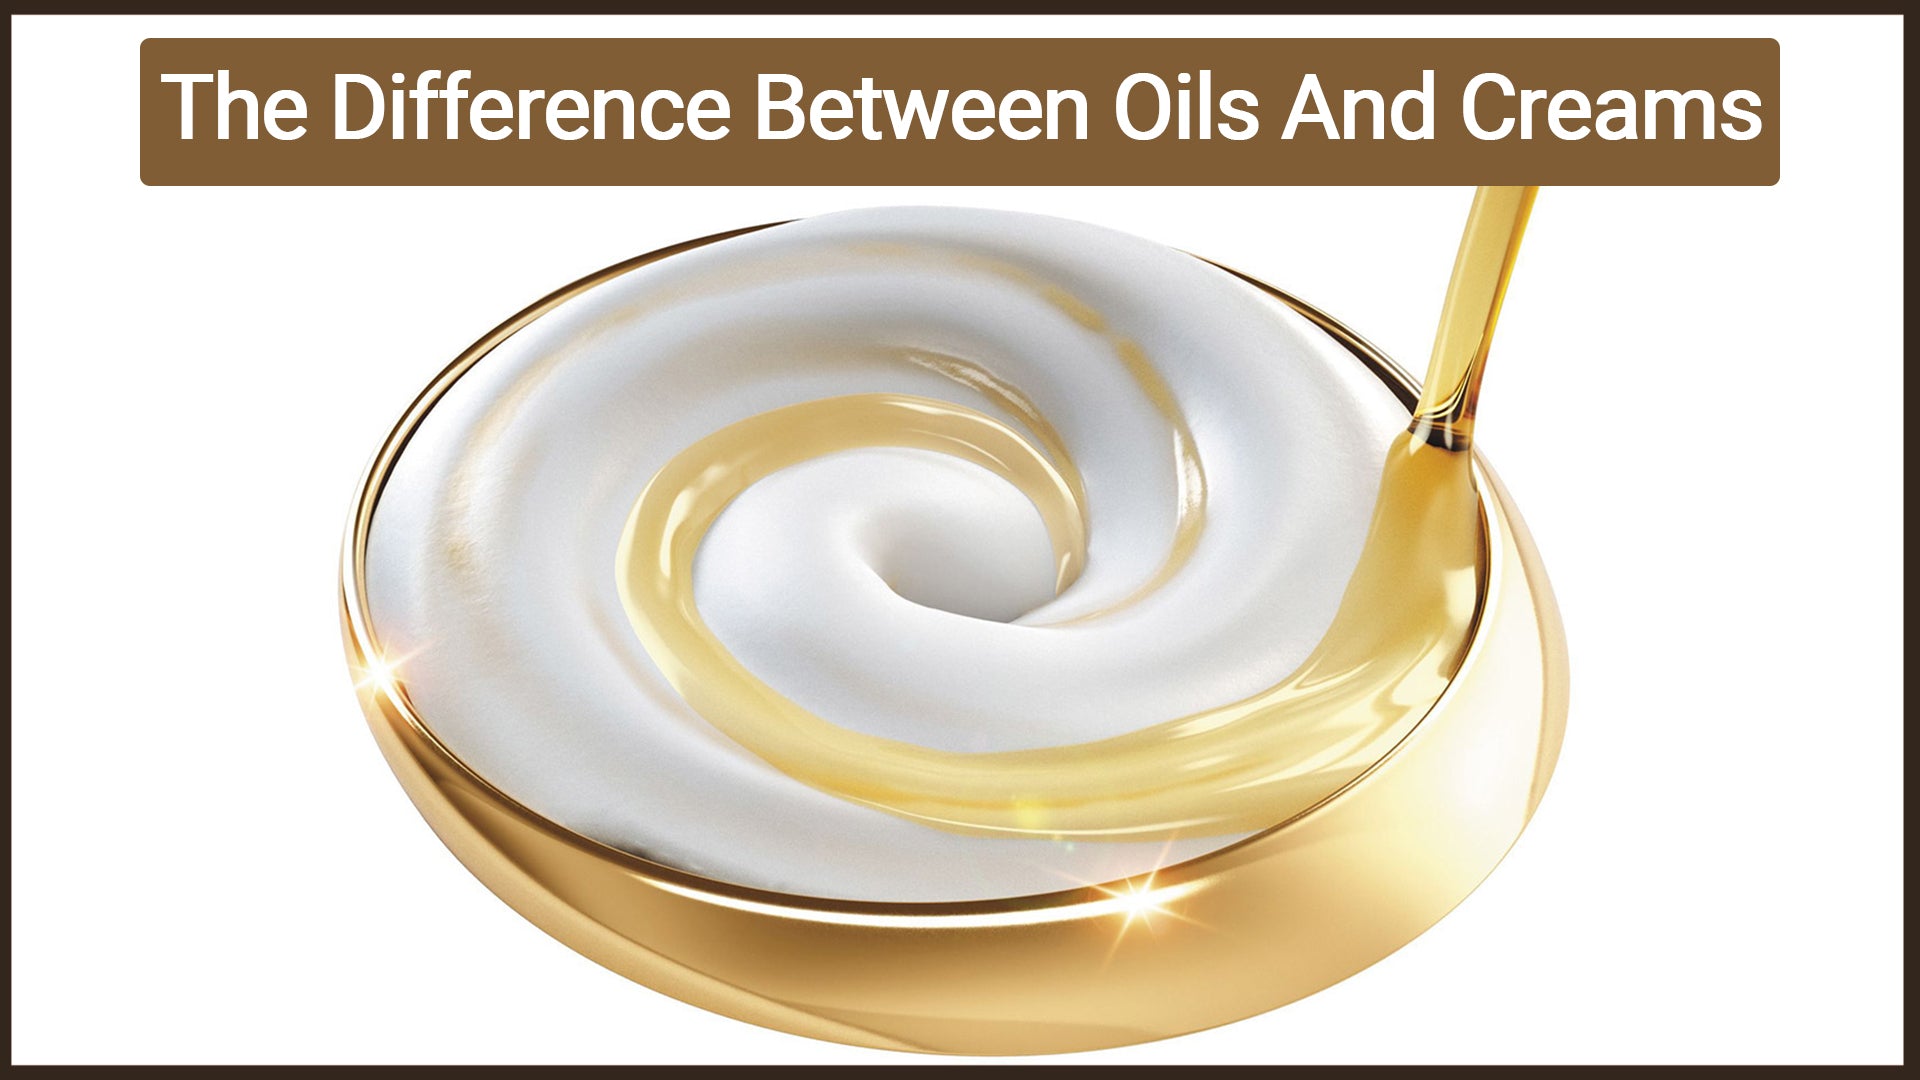 The Difference Between Oils And Creams